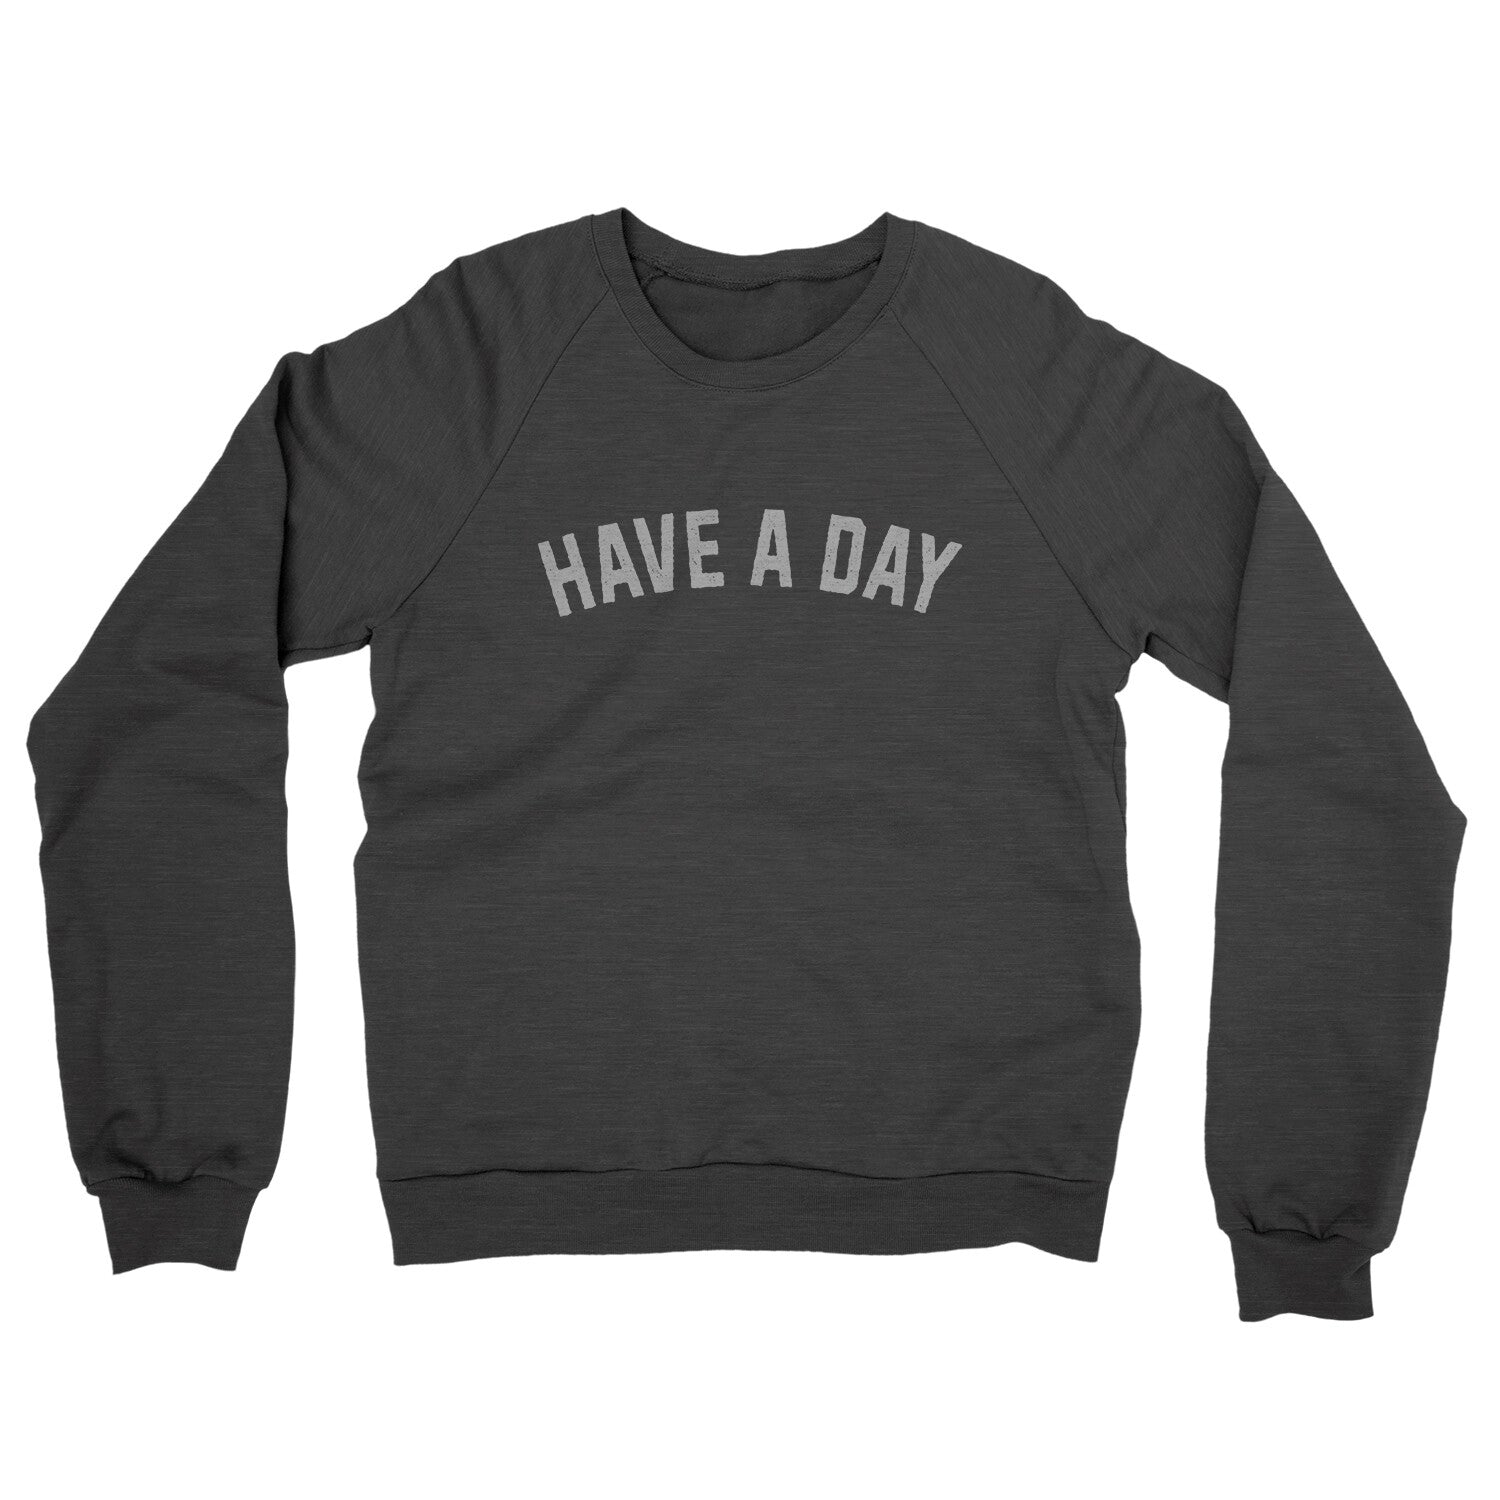 Have a Day in Charcoal Heather Color